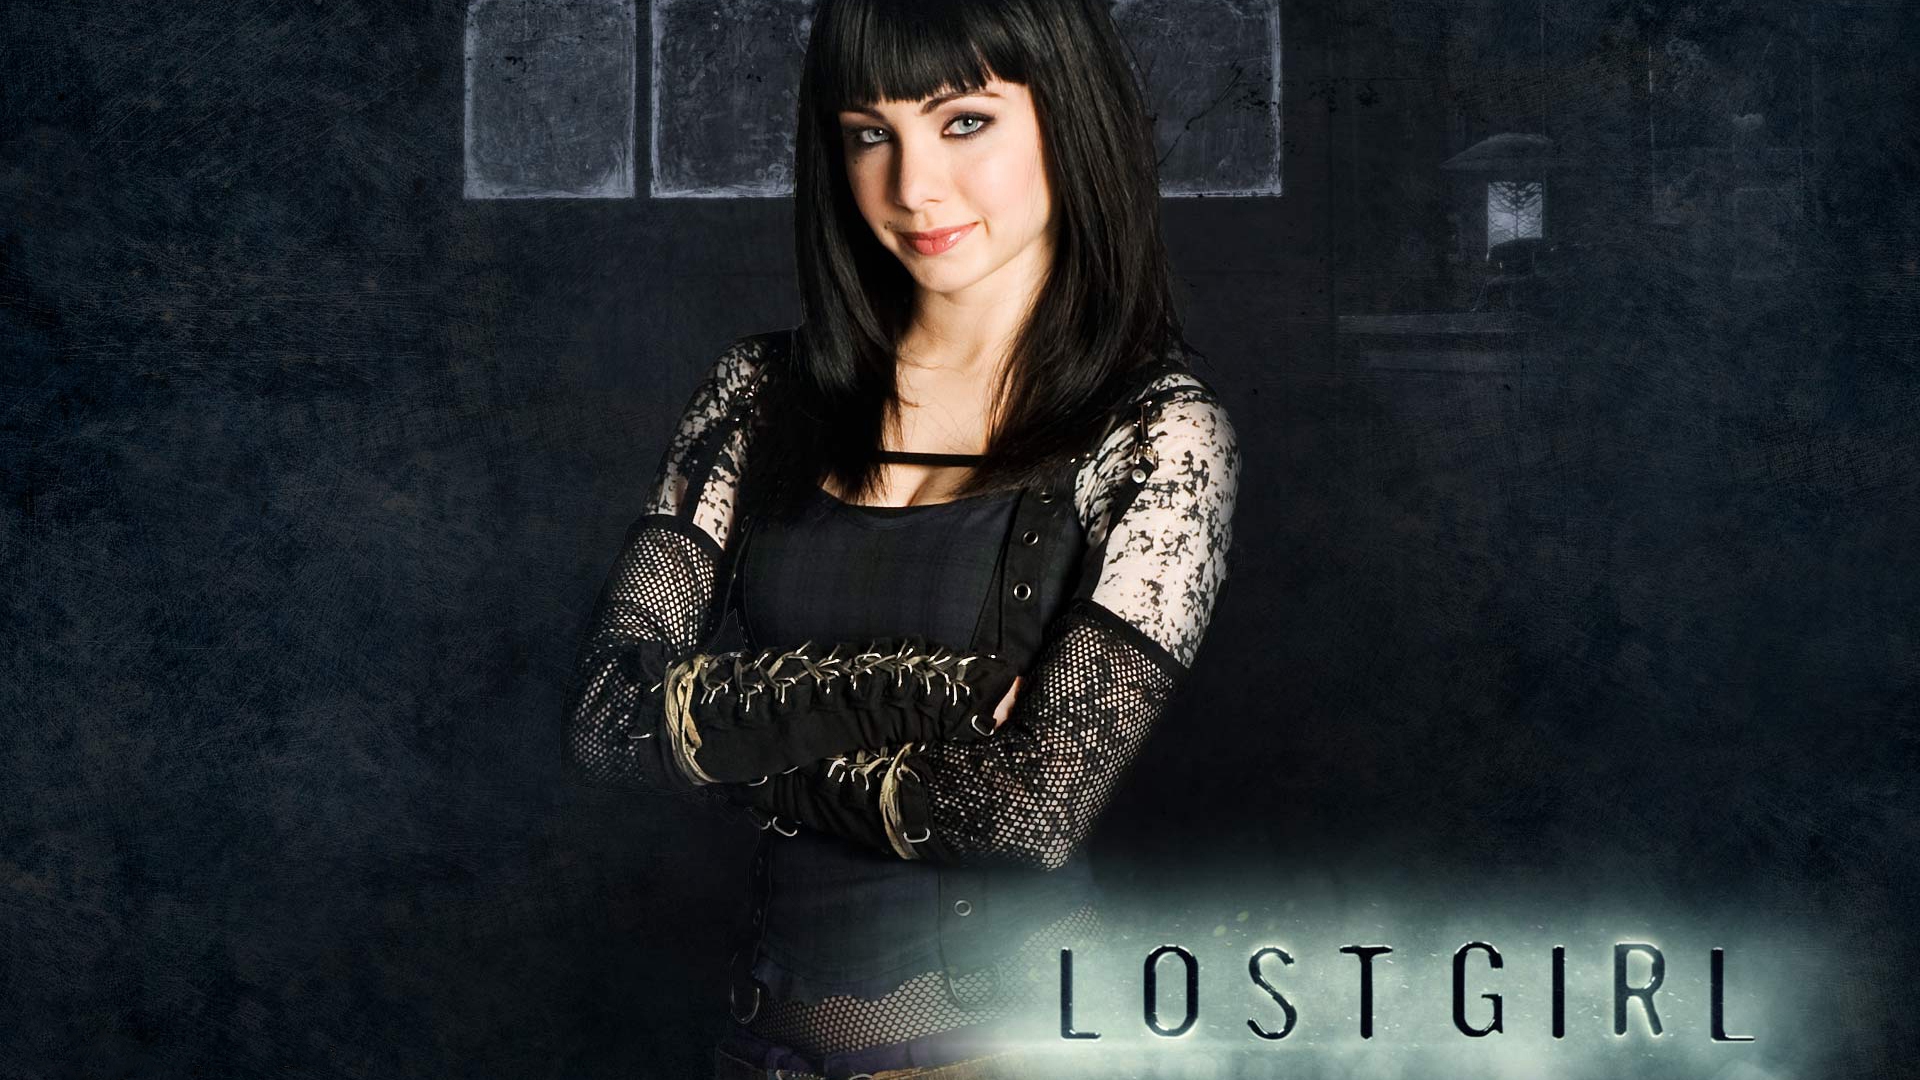 Lost Girl for 1920 x 1080 HDTV 1080p resolution